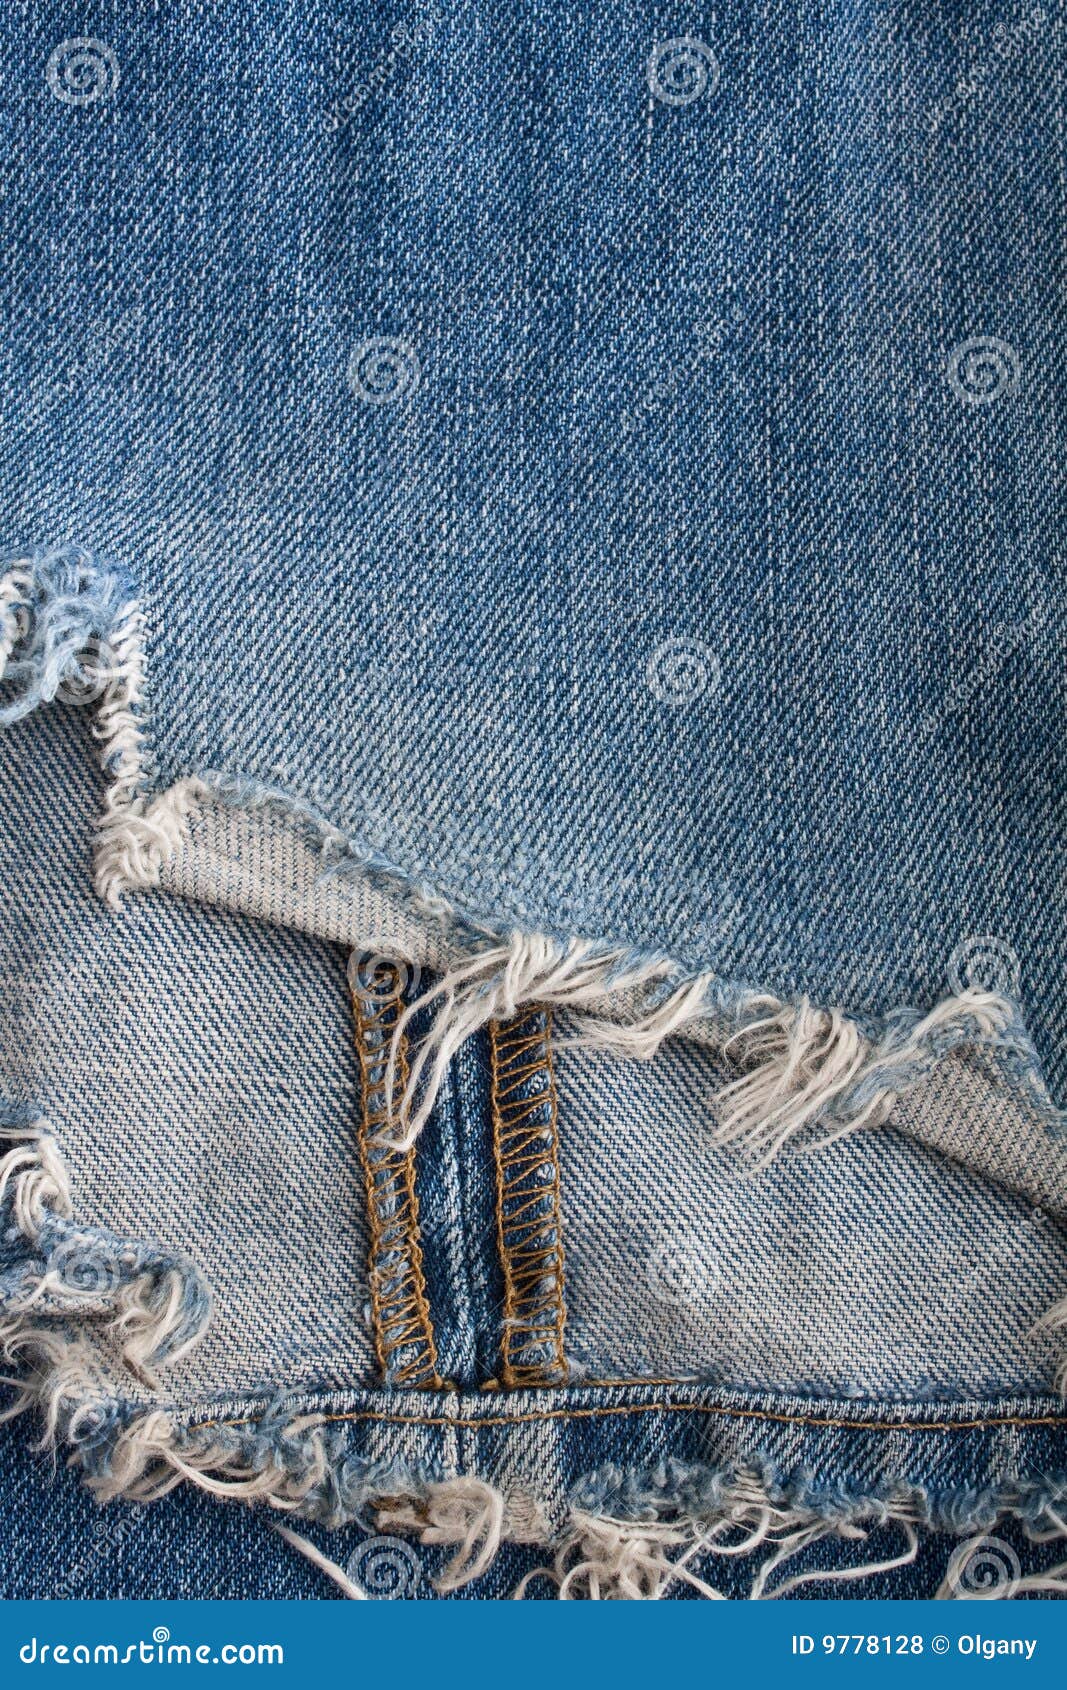 Torn blue jeans stock photo. Image of detail, jeans, indigo - 9778128